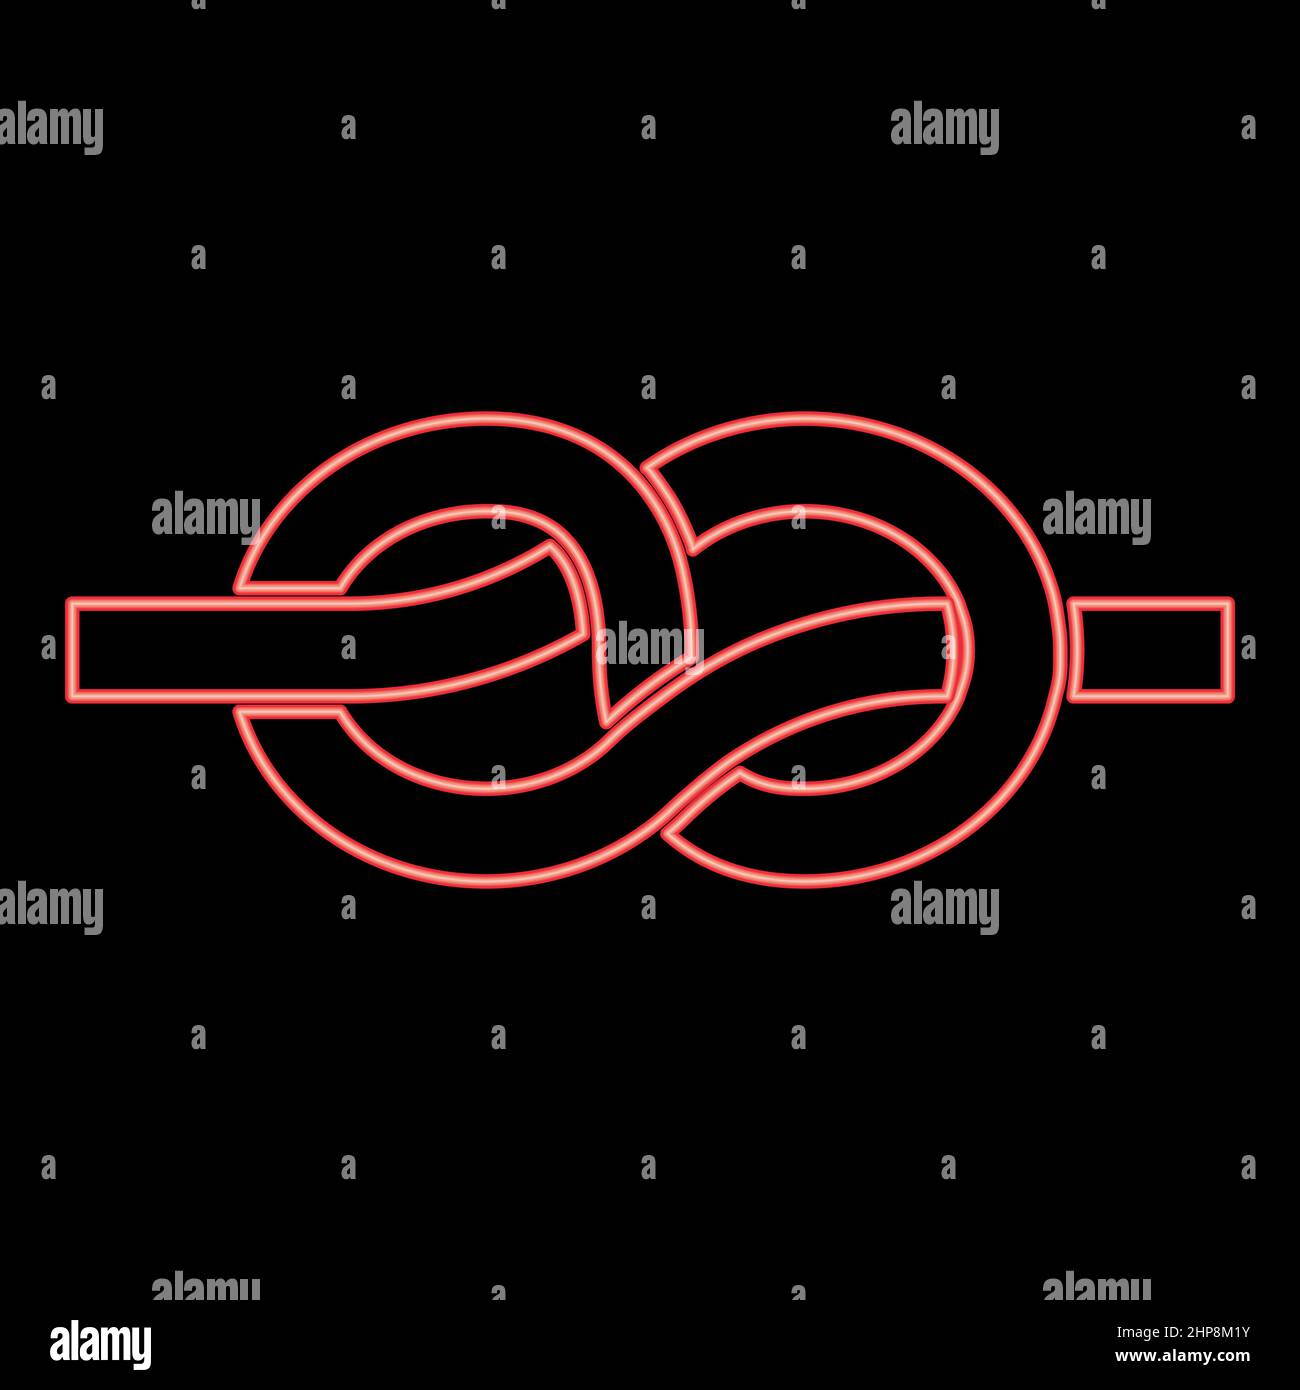 Neon knot red color vector illustration image flat style Stock Vector